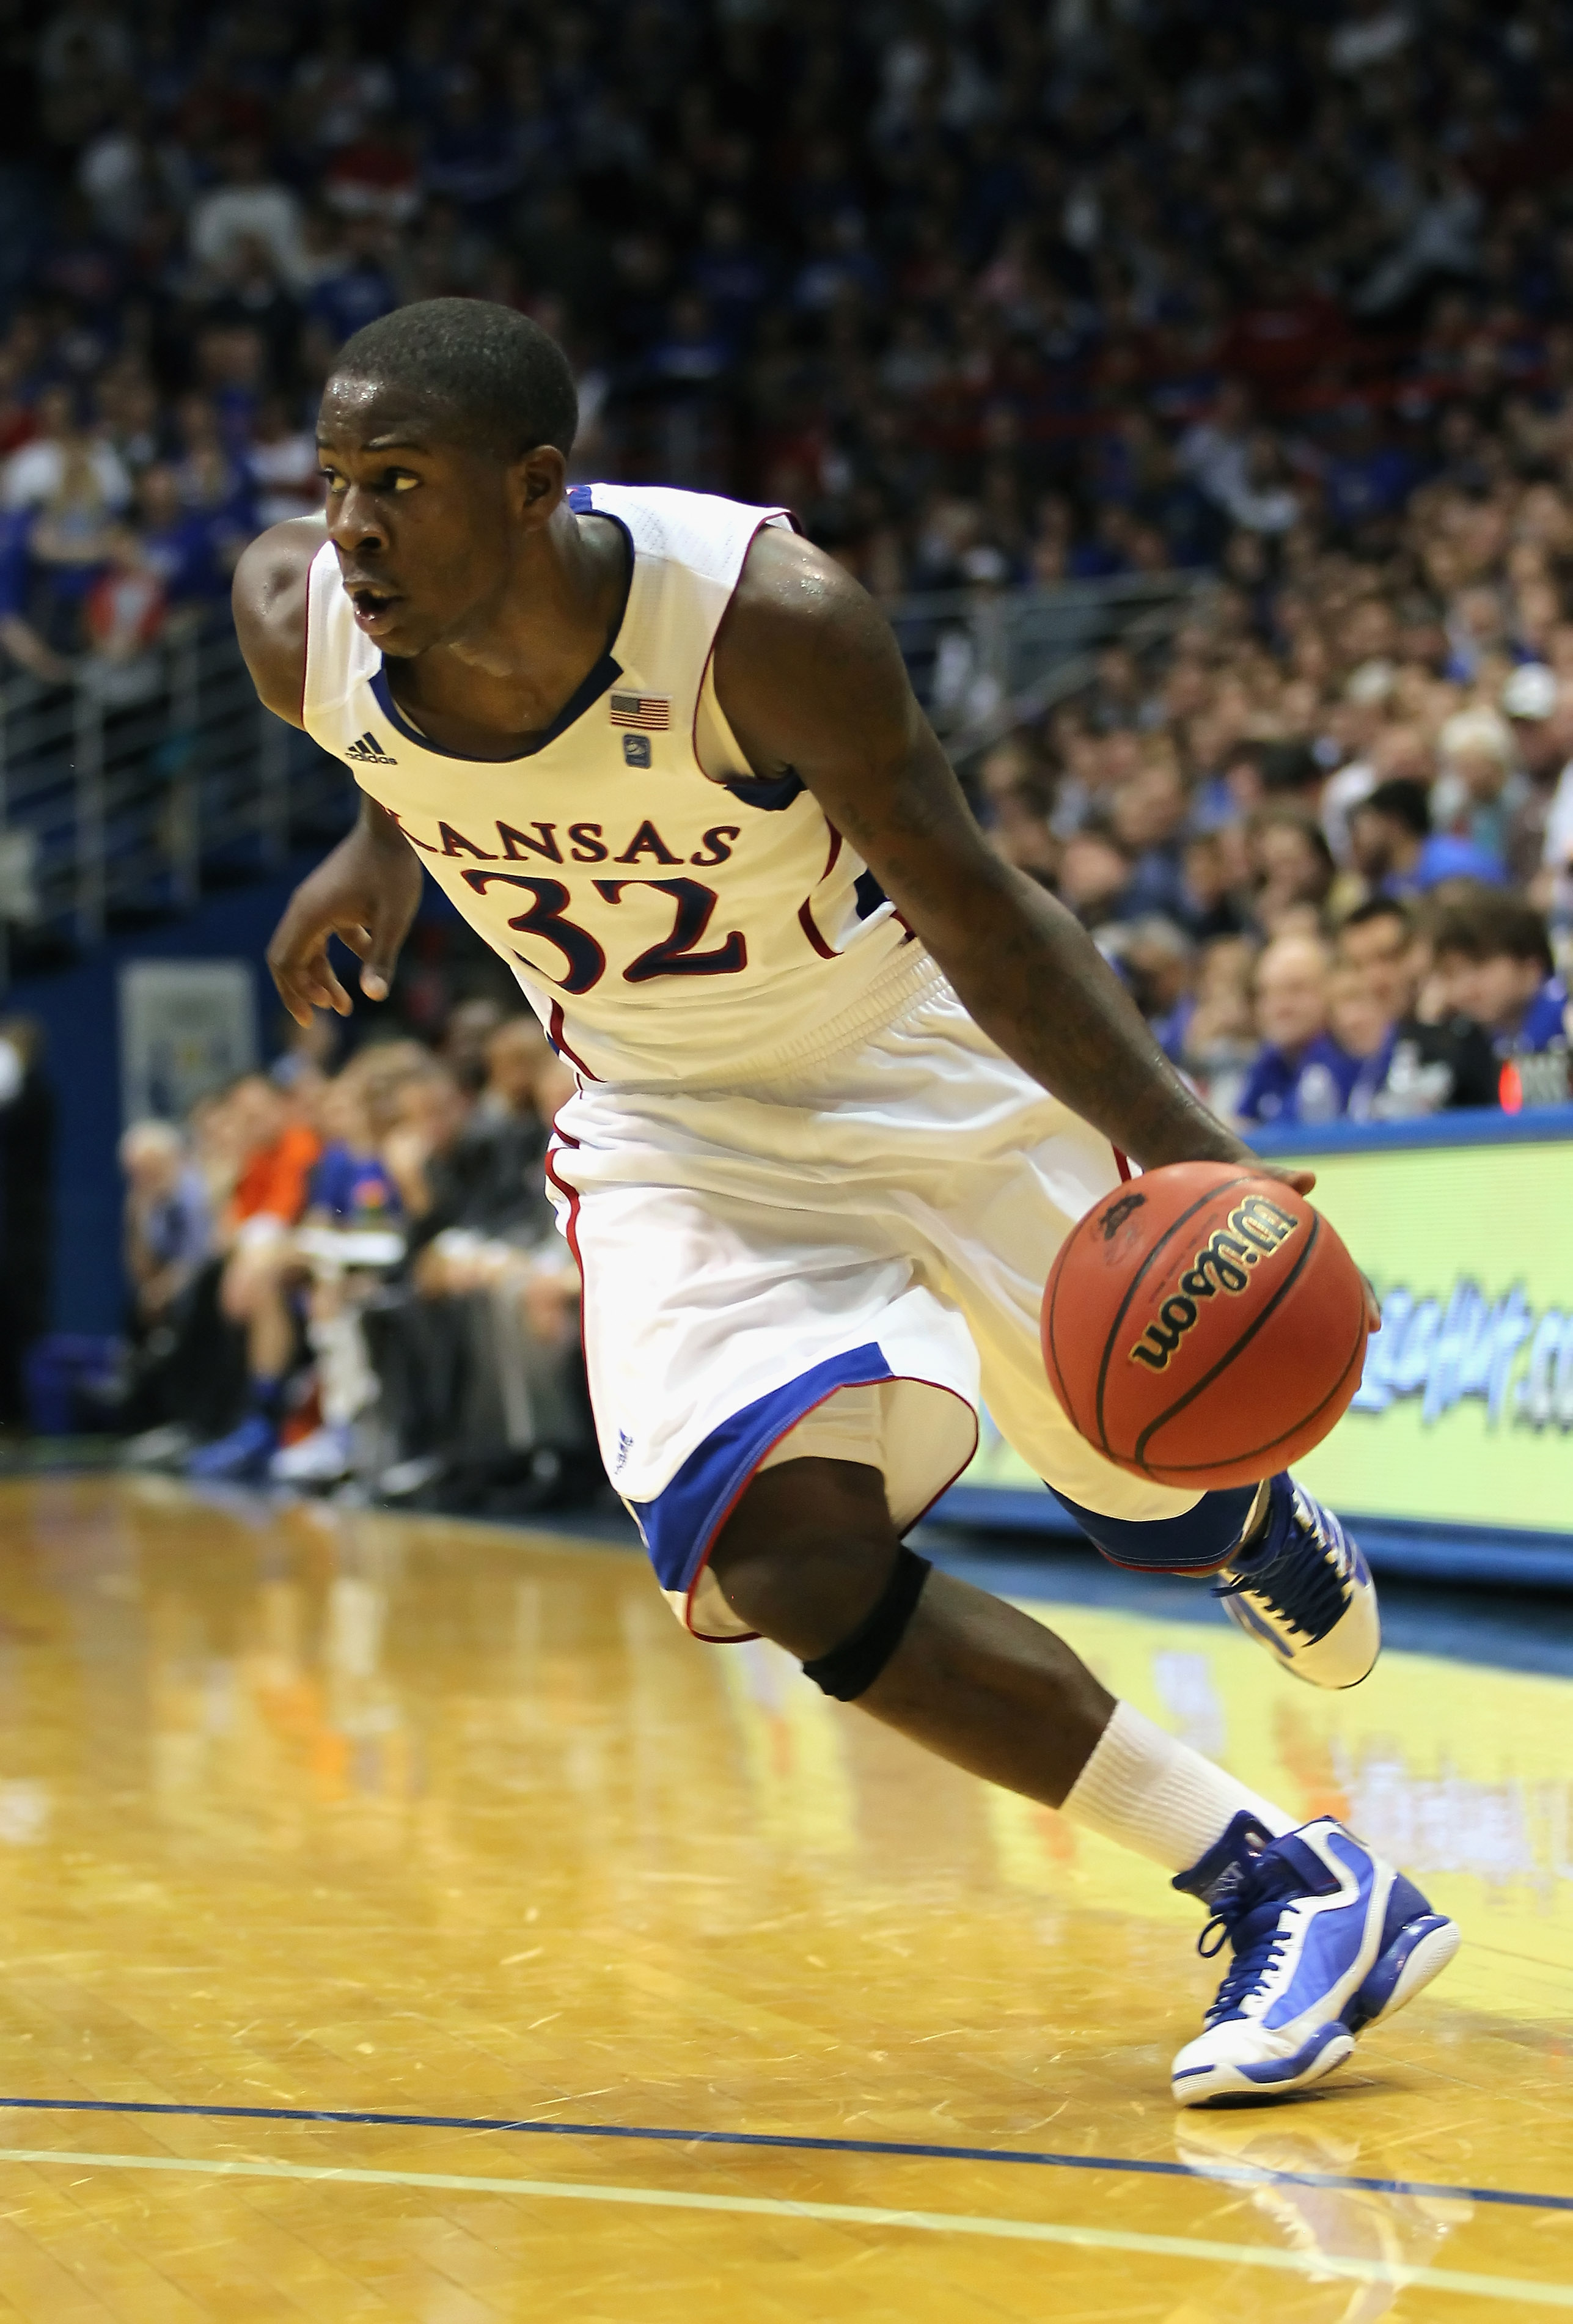 LAWRENCE, KS - DECEMBER 29:  Josh Selby #32 of the Kansas Jayhawks in action during the game against the University of Texas Arlington Mavericks on December 29, 2010 at Allen Fieldhouse in Lawrence, Kansas.  (Photo by Jamie Squire/Getty Images)